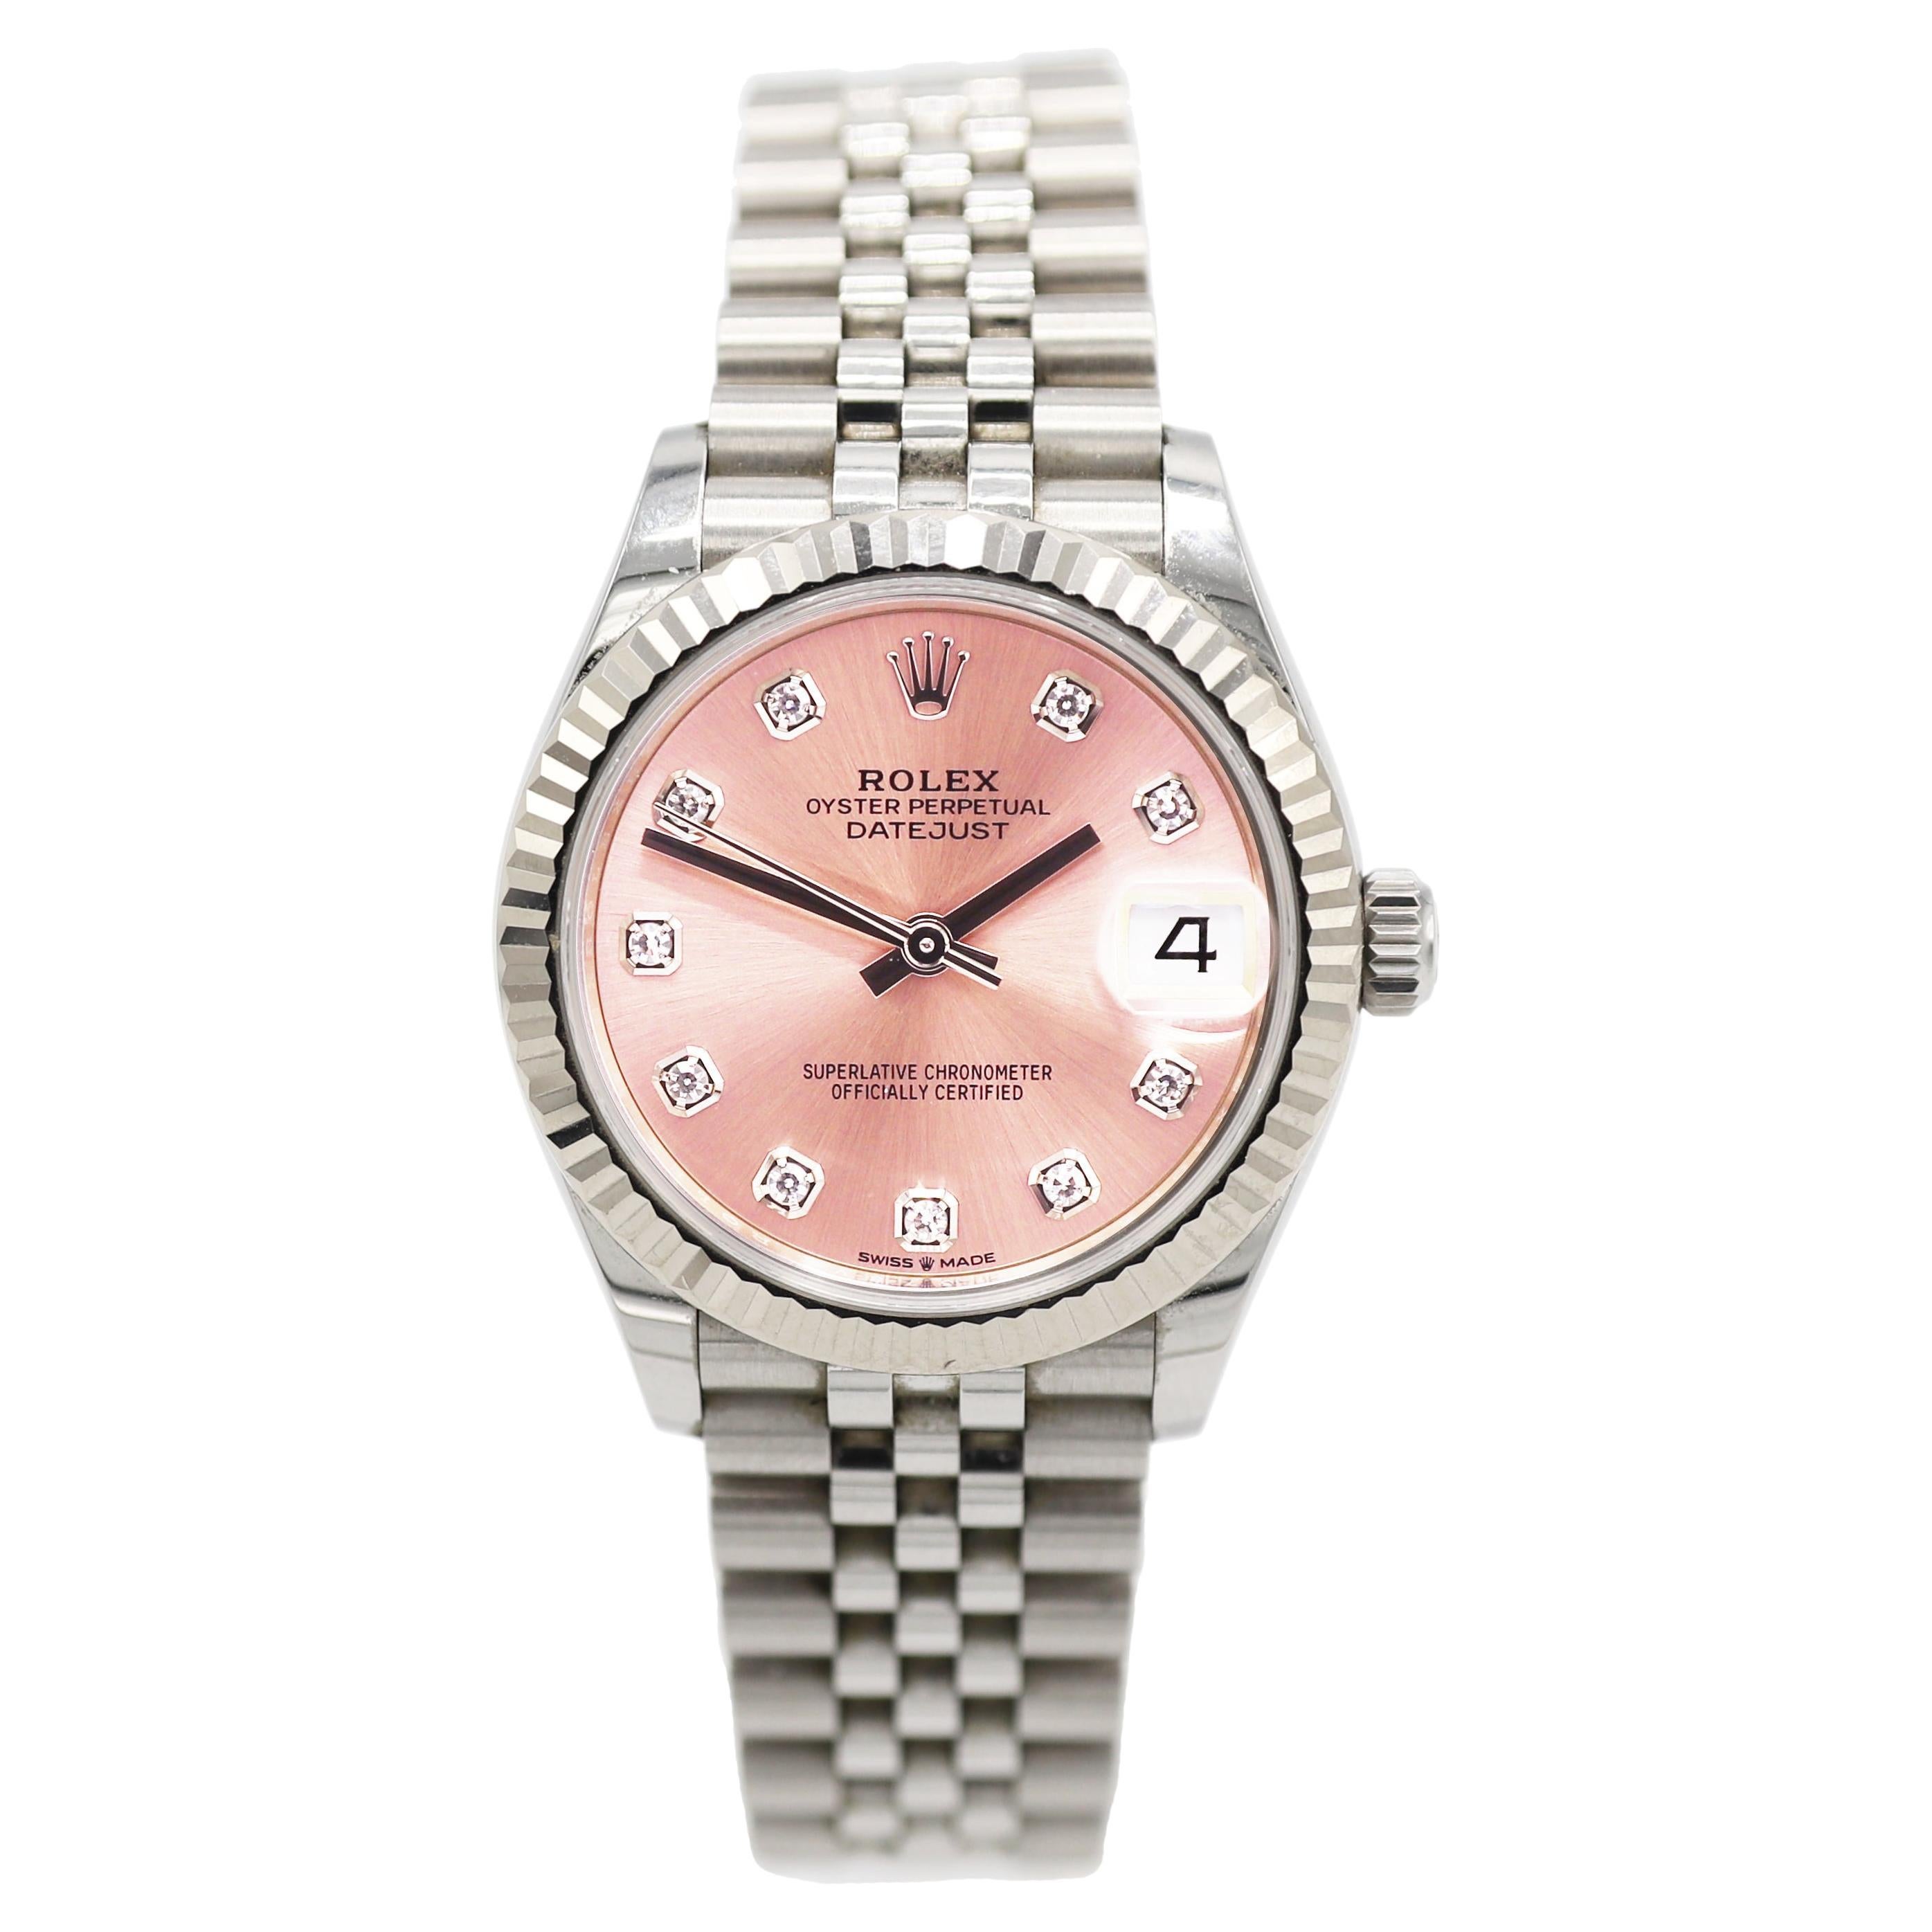 Rolex Datejust 31 Stainless Steel Pink Diamond Dial Ladies Watch Reference 27827